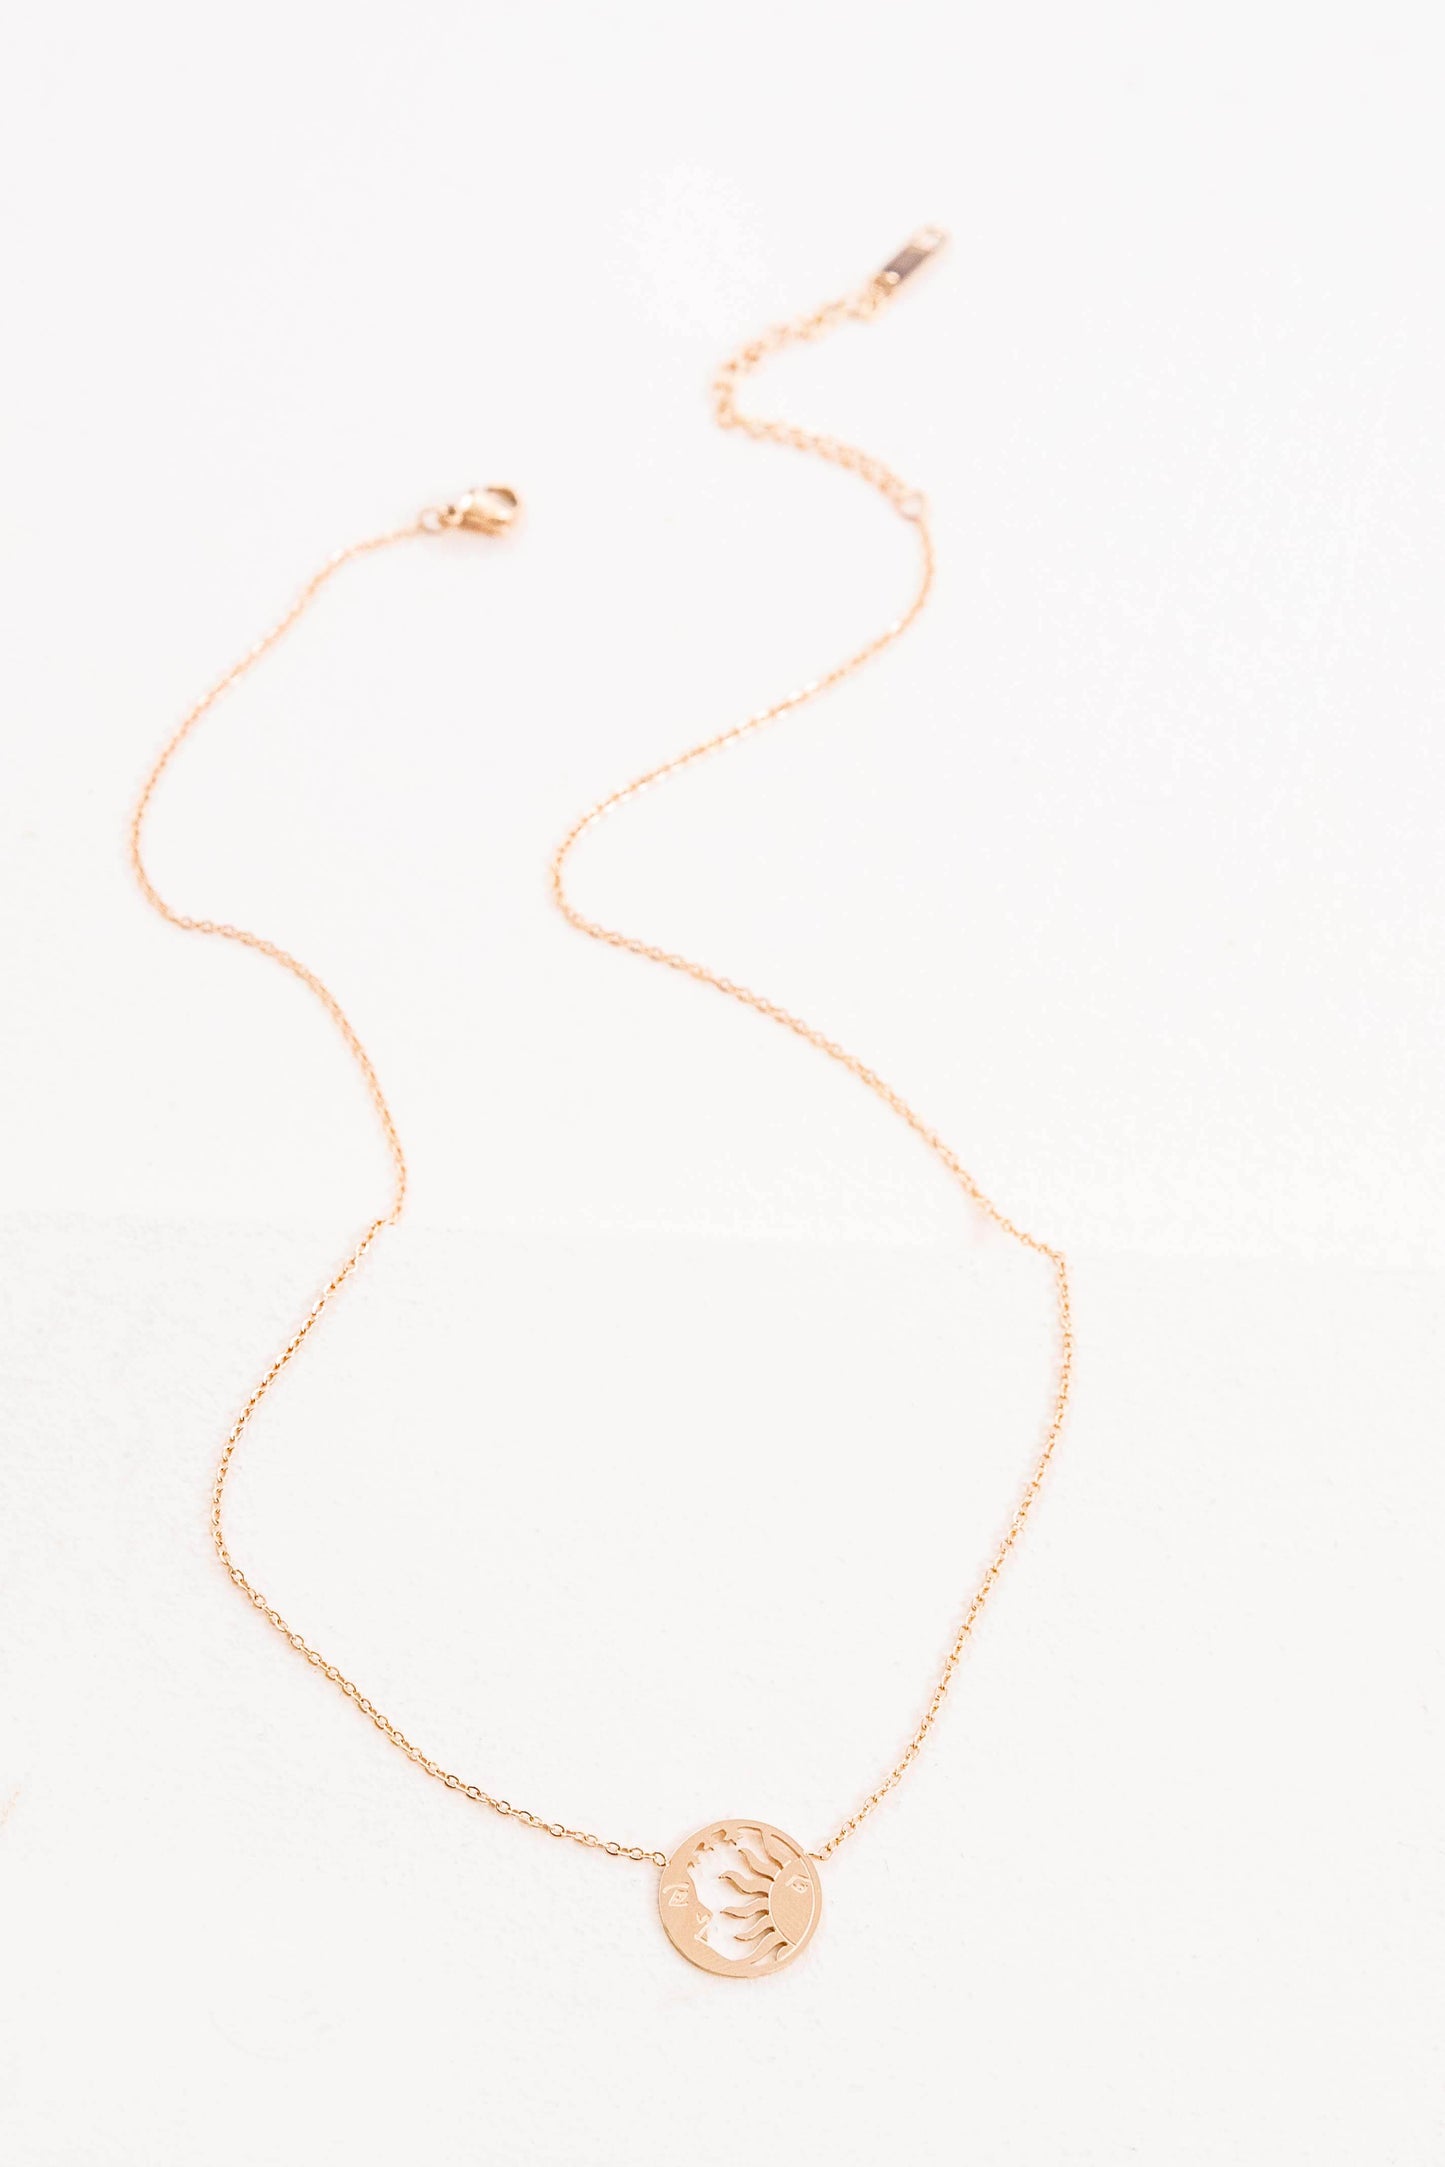 Match Made In Heaven Necklace | Rose Gold (14K)